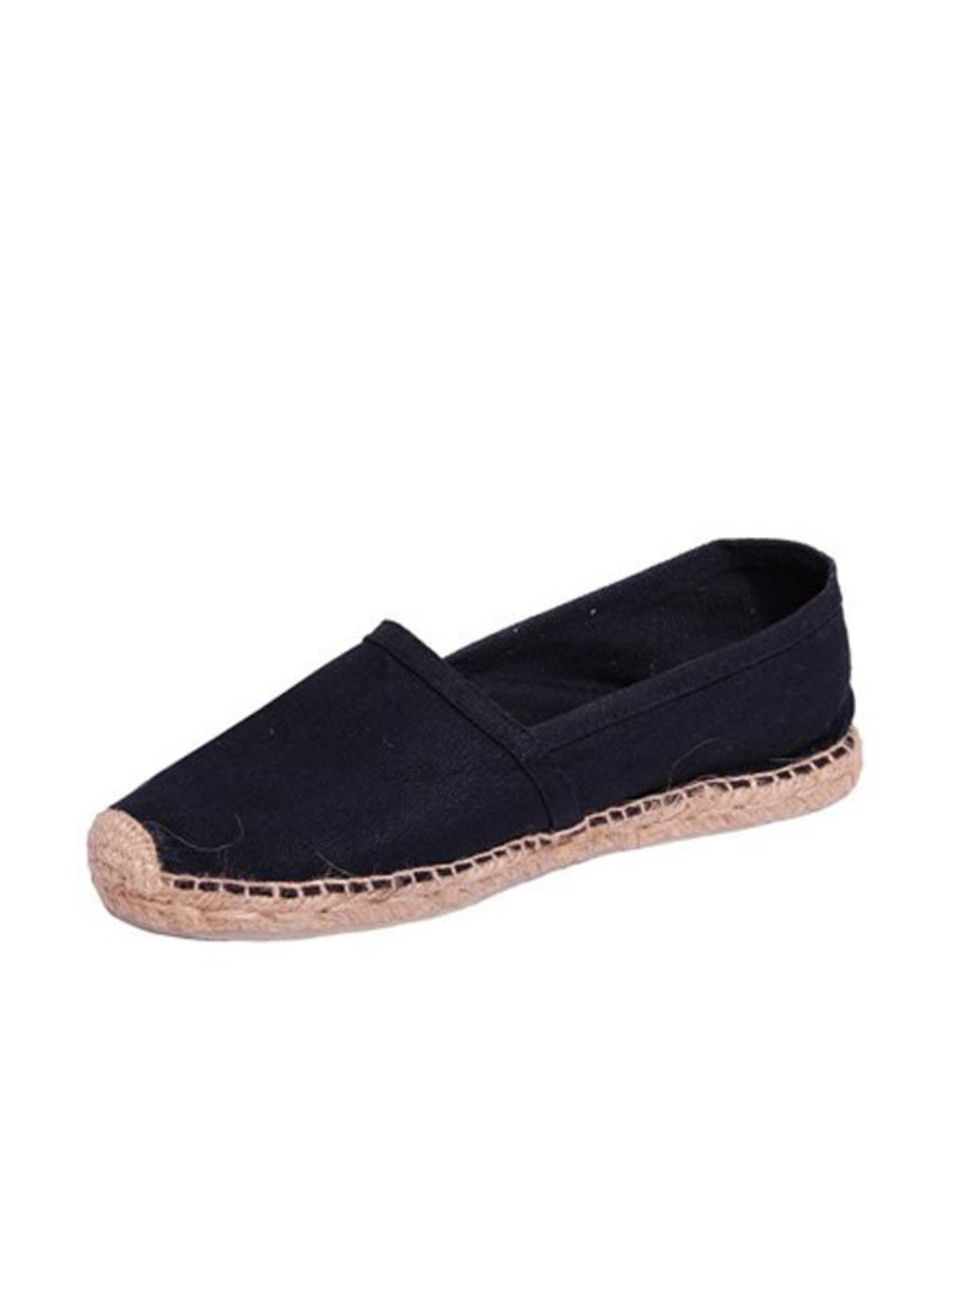 <p> Perfect for longs days at festivals, a classic pair of espadrilles will last all summer and work with anything from denim shorts to chinos. Black espadrilles, £12, by <a href="http://www.pretaportobello.com/shop/shoes-and-accessories/shoes/pretaportob